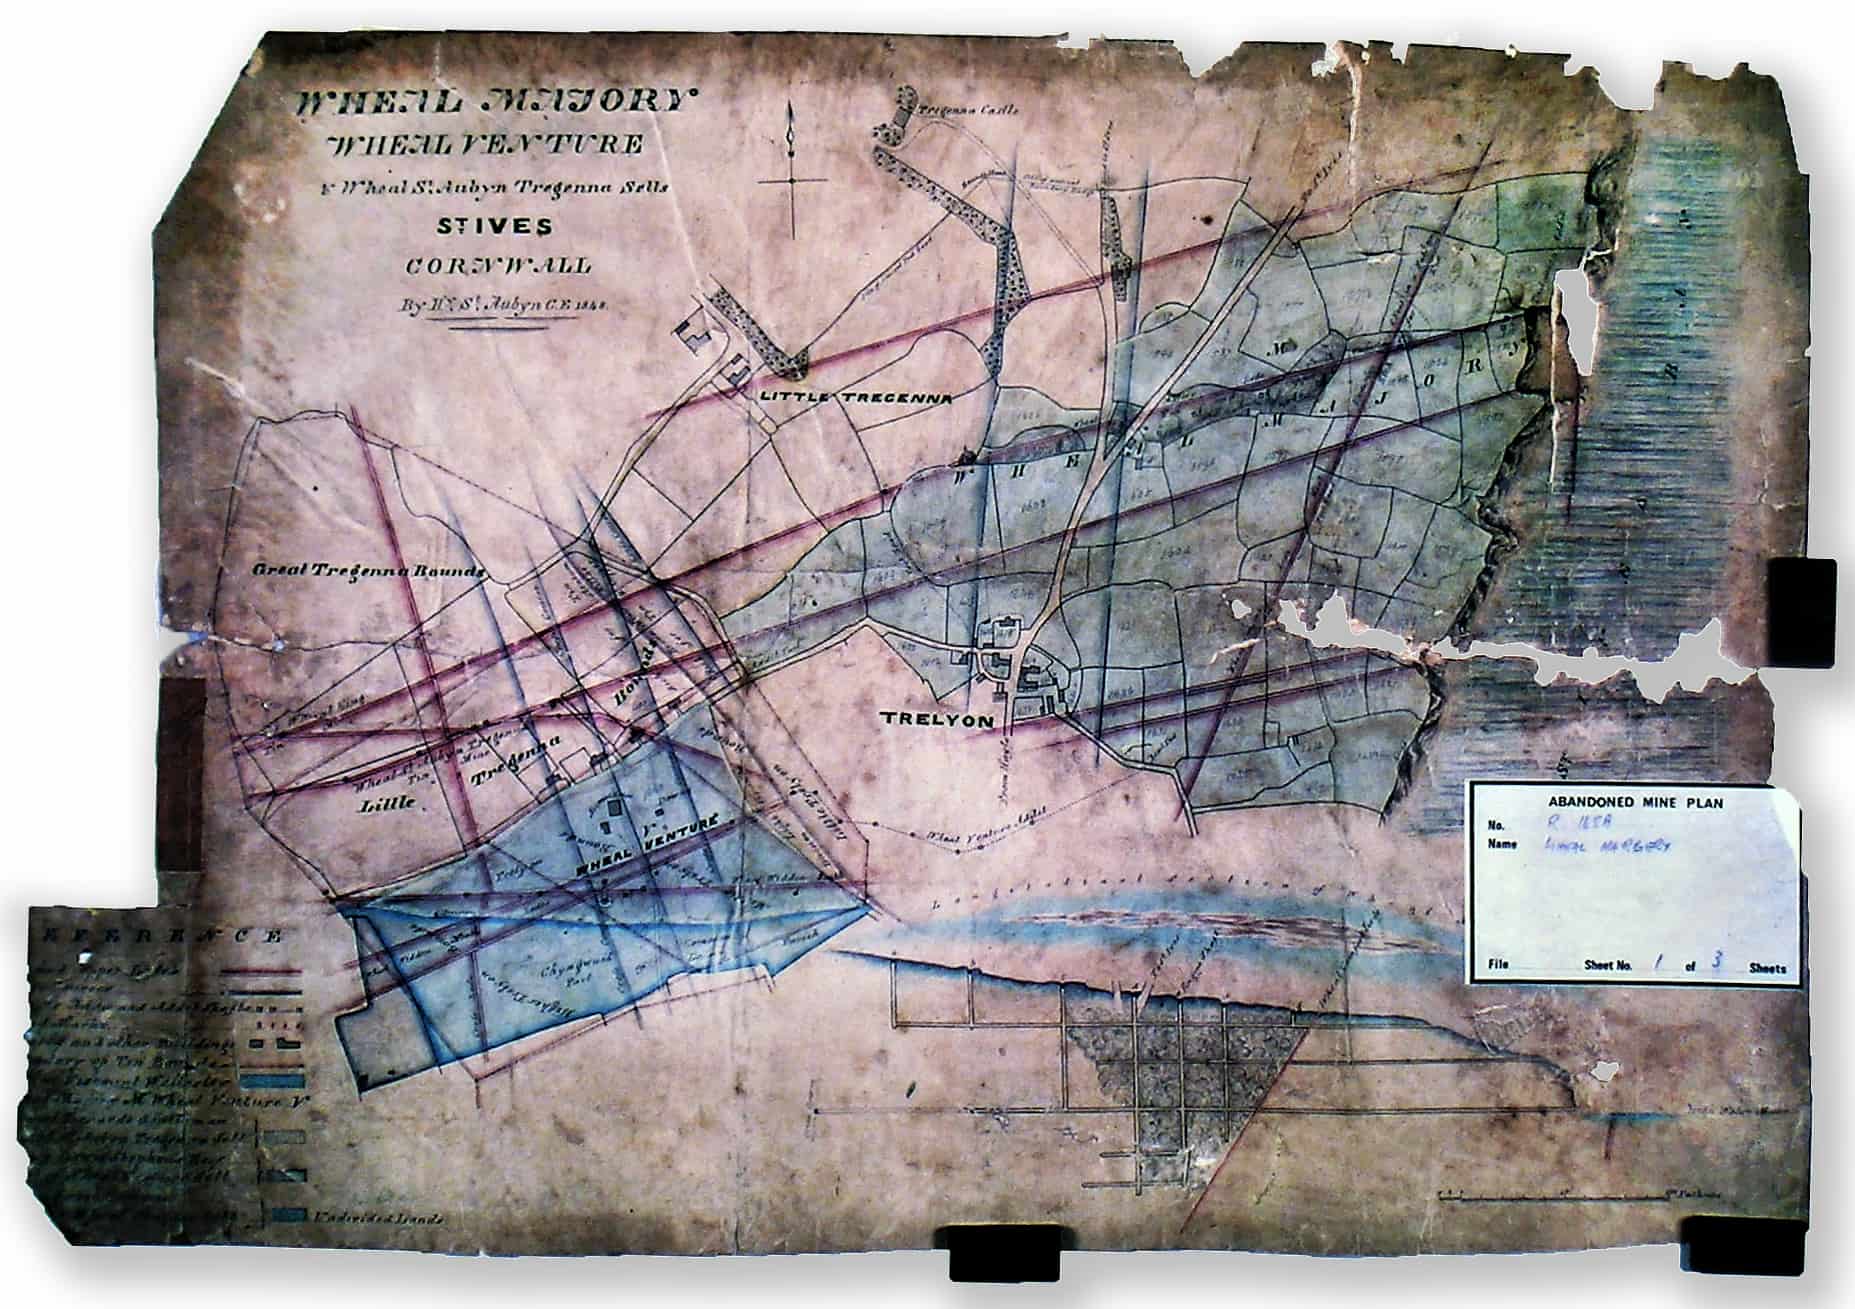 Authentic mine plan from 1848 showing Wheal St. Aubyn, a mine from the Carbis Bay area of Cornwall